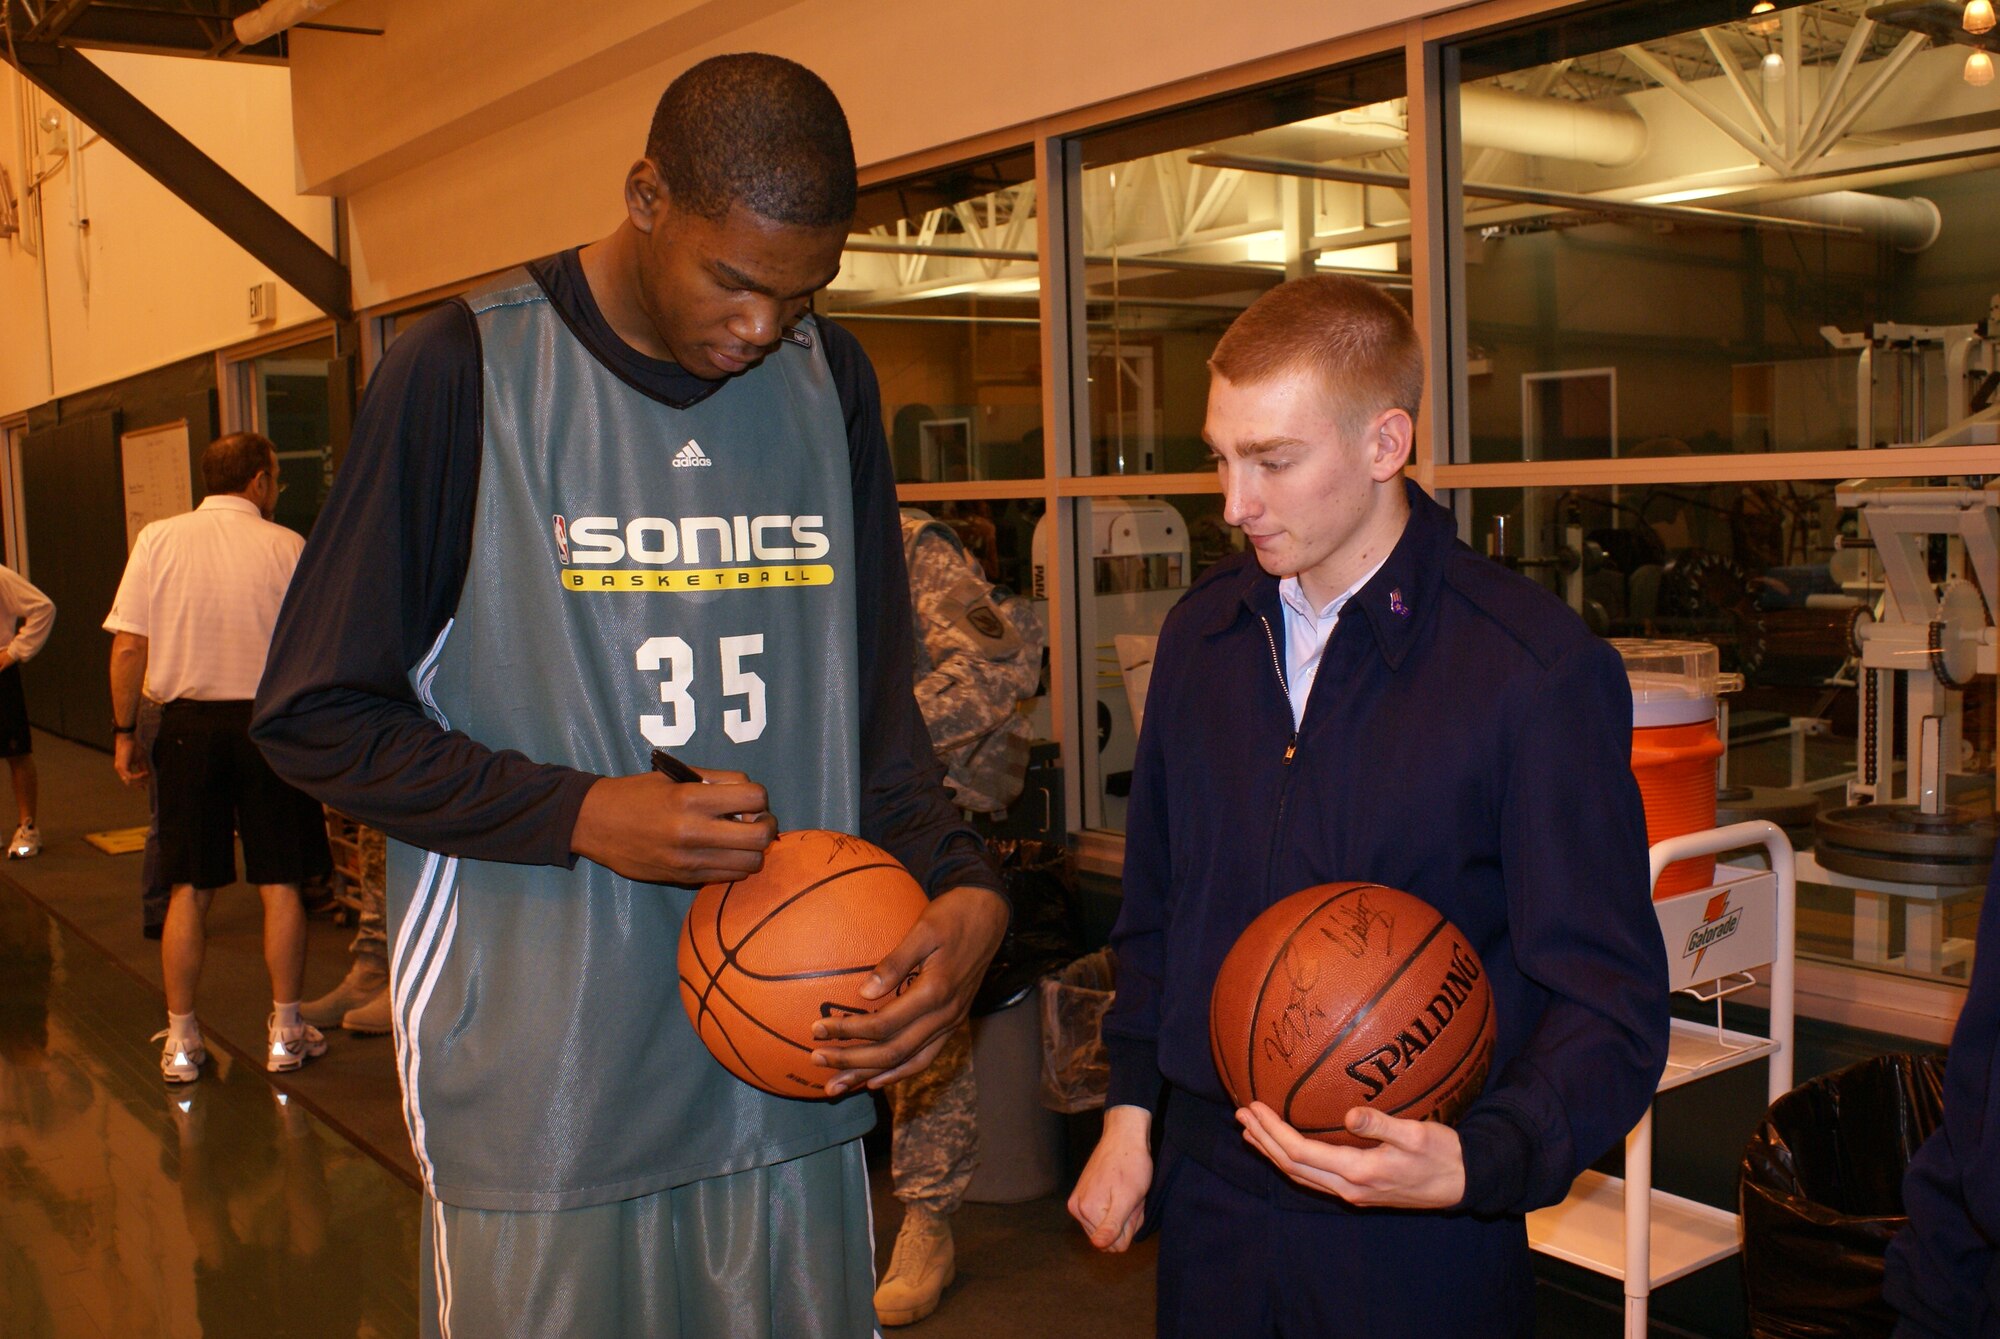 Seattle SuperSonics rookie Kevin Durant signs a basketball for Senior Airman Troy Bame, 62nd Operations Support Squadron,Wednesday at the Sonics practice facility in Seattle. Four McChord Airmen and servicemembers from other branches of the militarywere invited to the facility to watch a practice, meet and eat lunch with the players, and attend Wednesday night’s gameagainst the New Orleans Hornets.